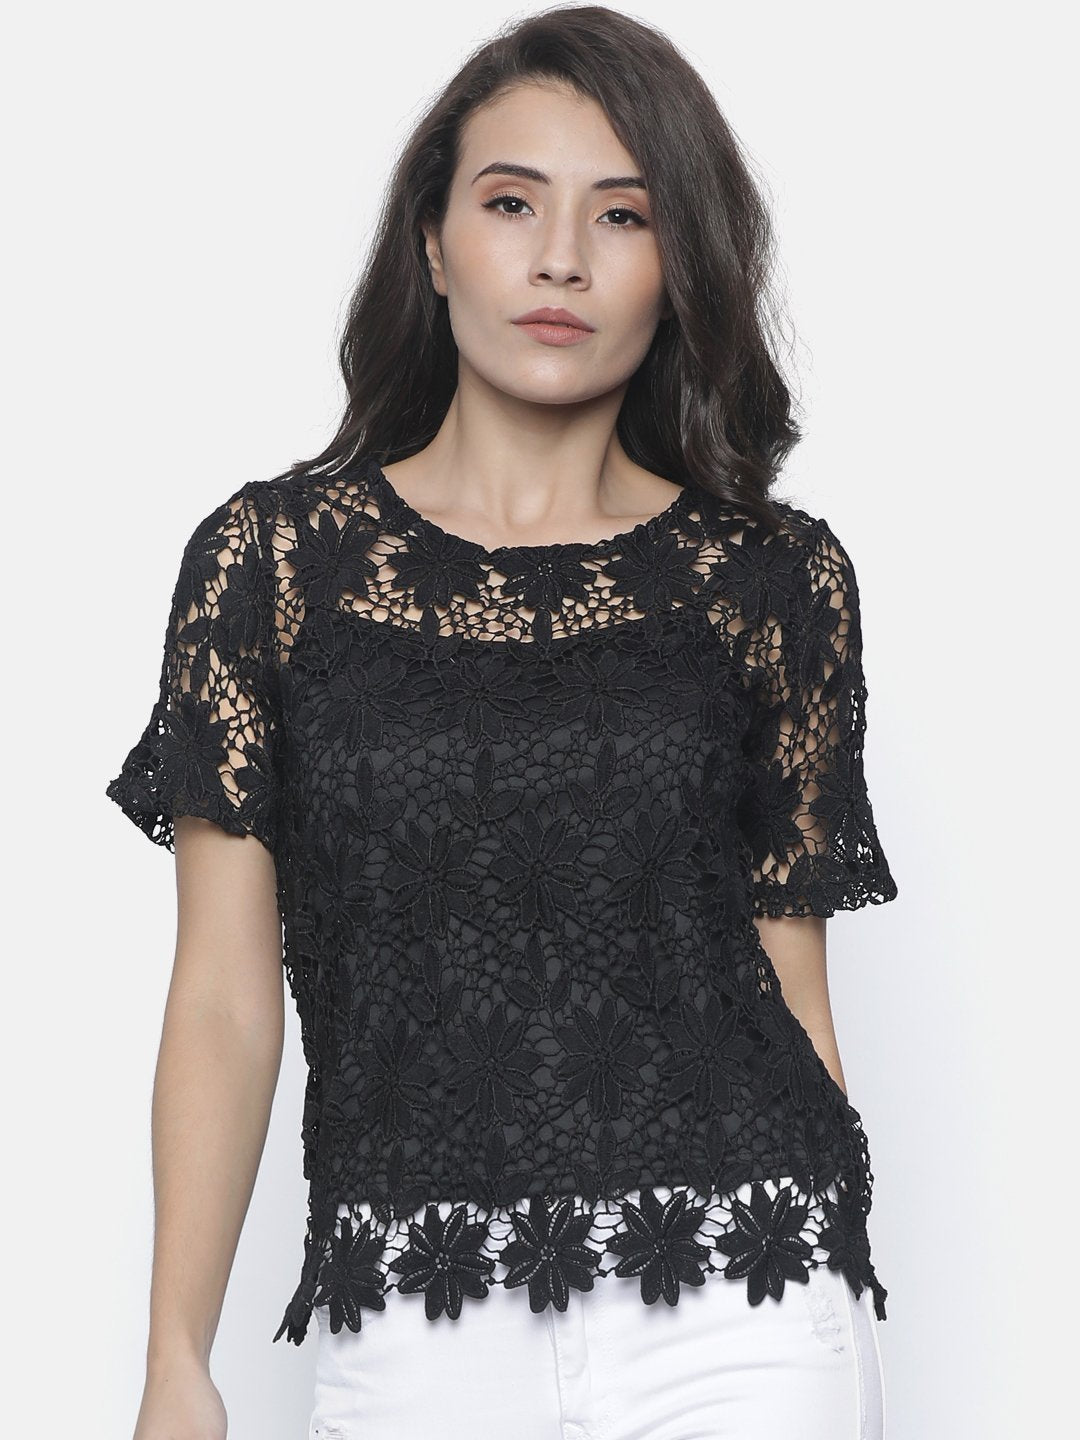 IS.U Black Lace Top With Cami